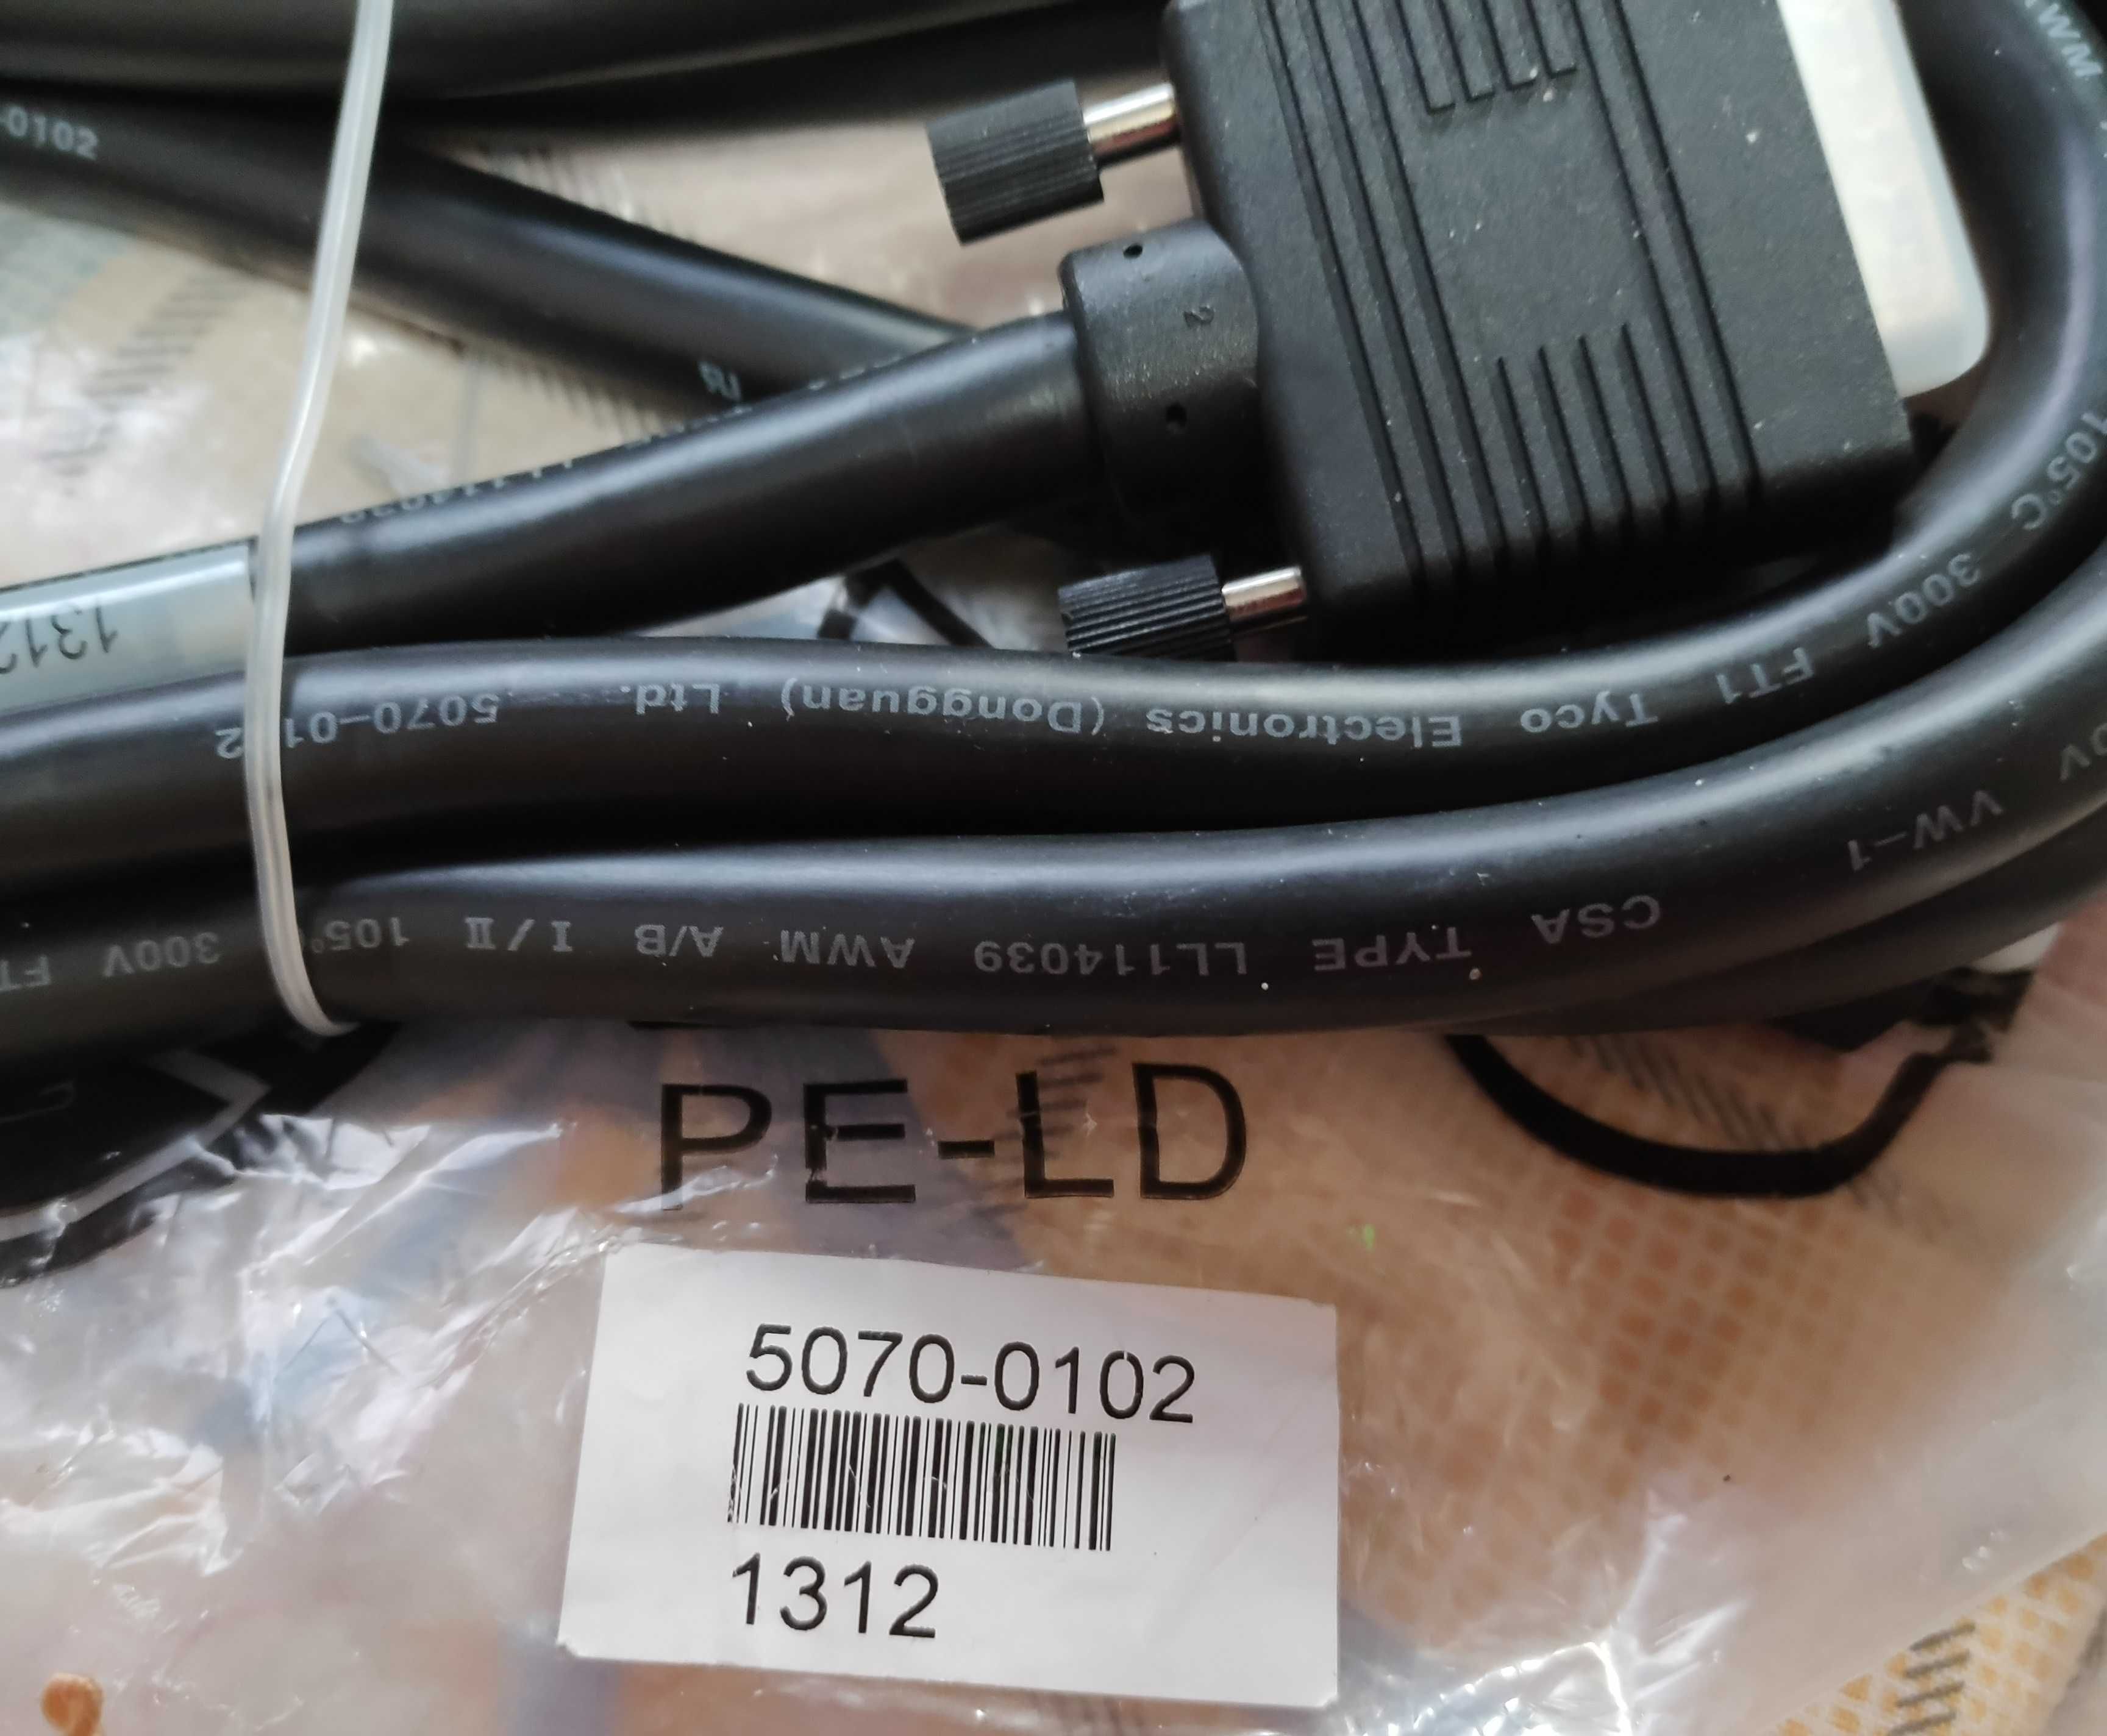 Кабель HP 5070-0102 Eps/rps Cable Assembly 2.0m Long - Has 7-pin C